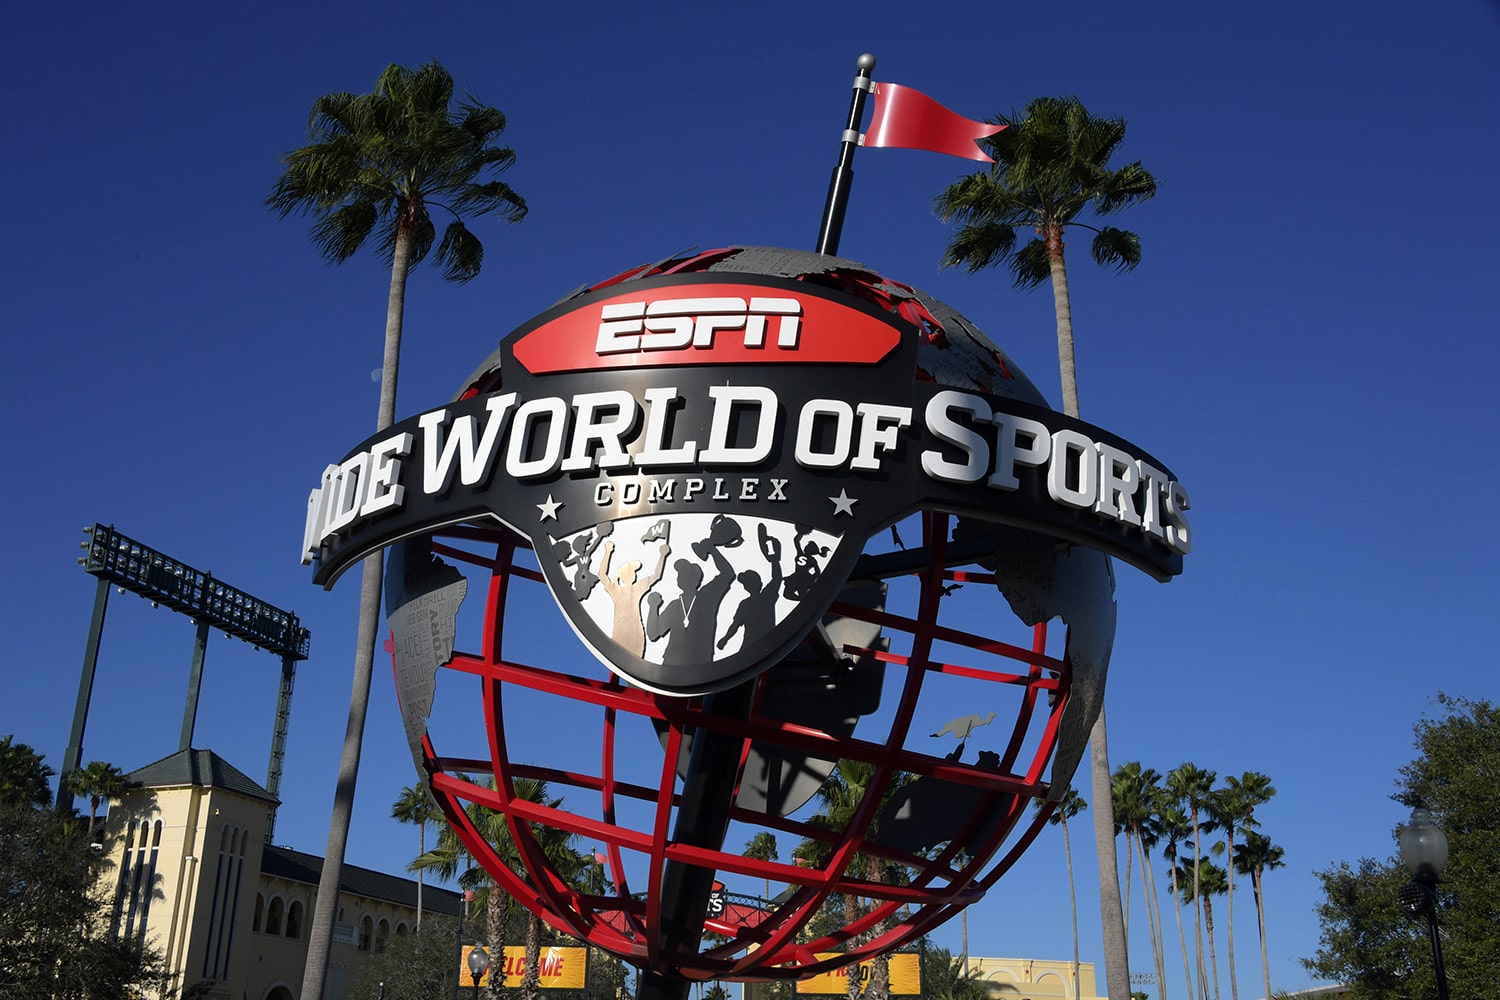 Disney is open to potentially selling an equity stake in ESPN.